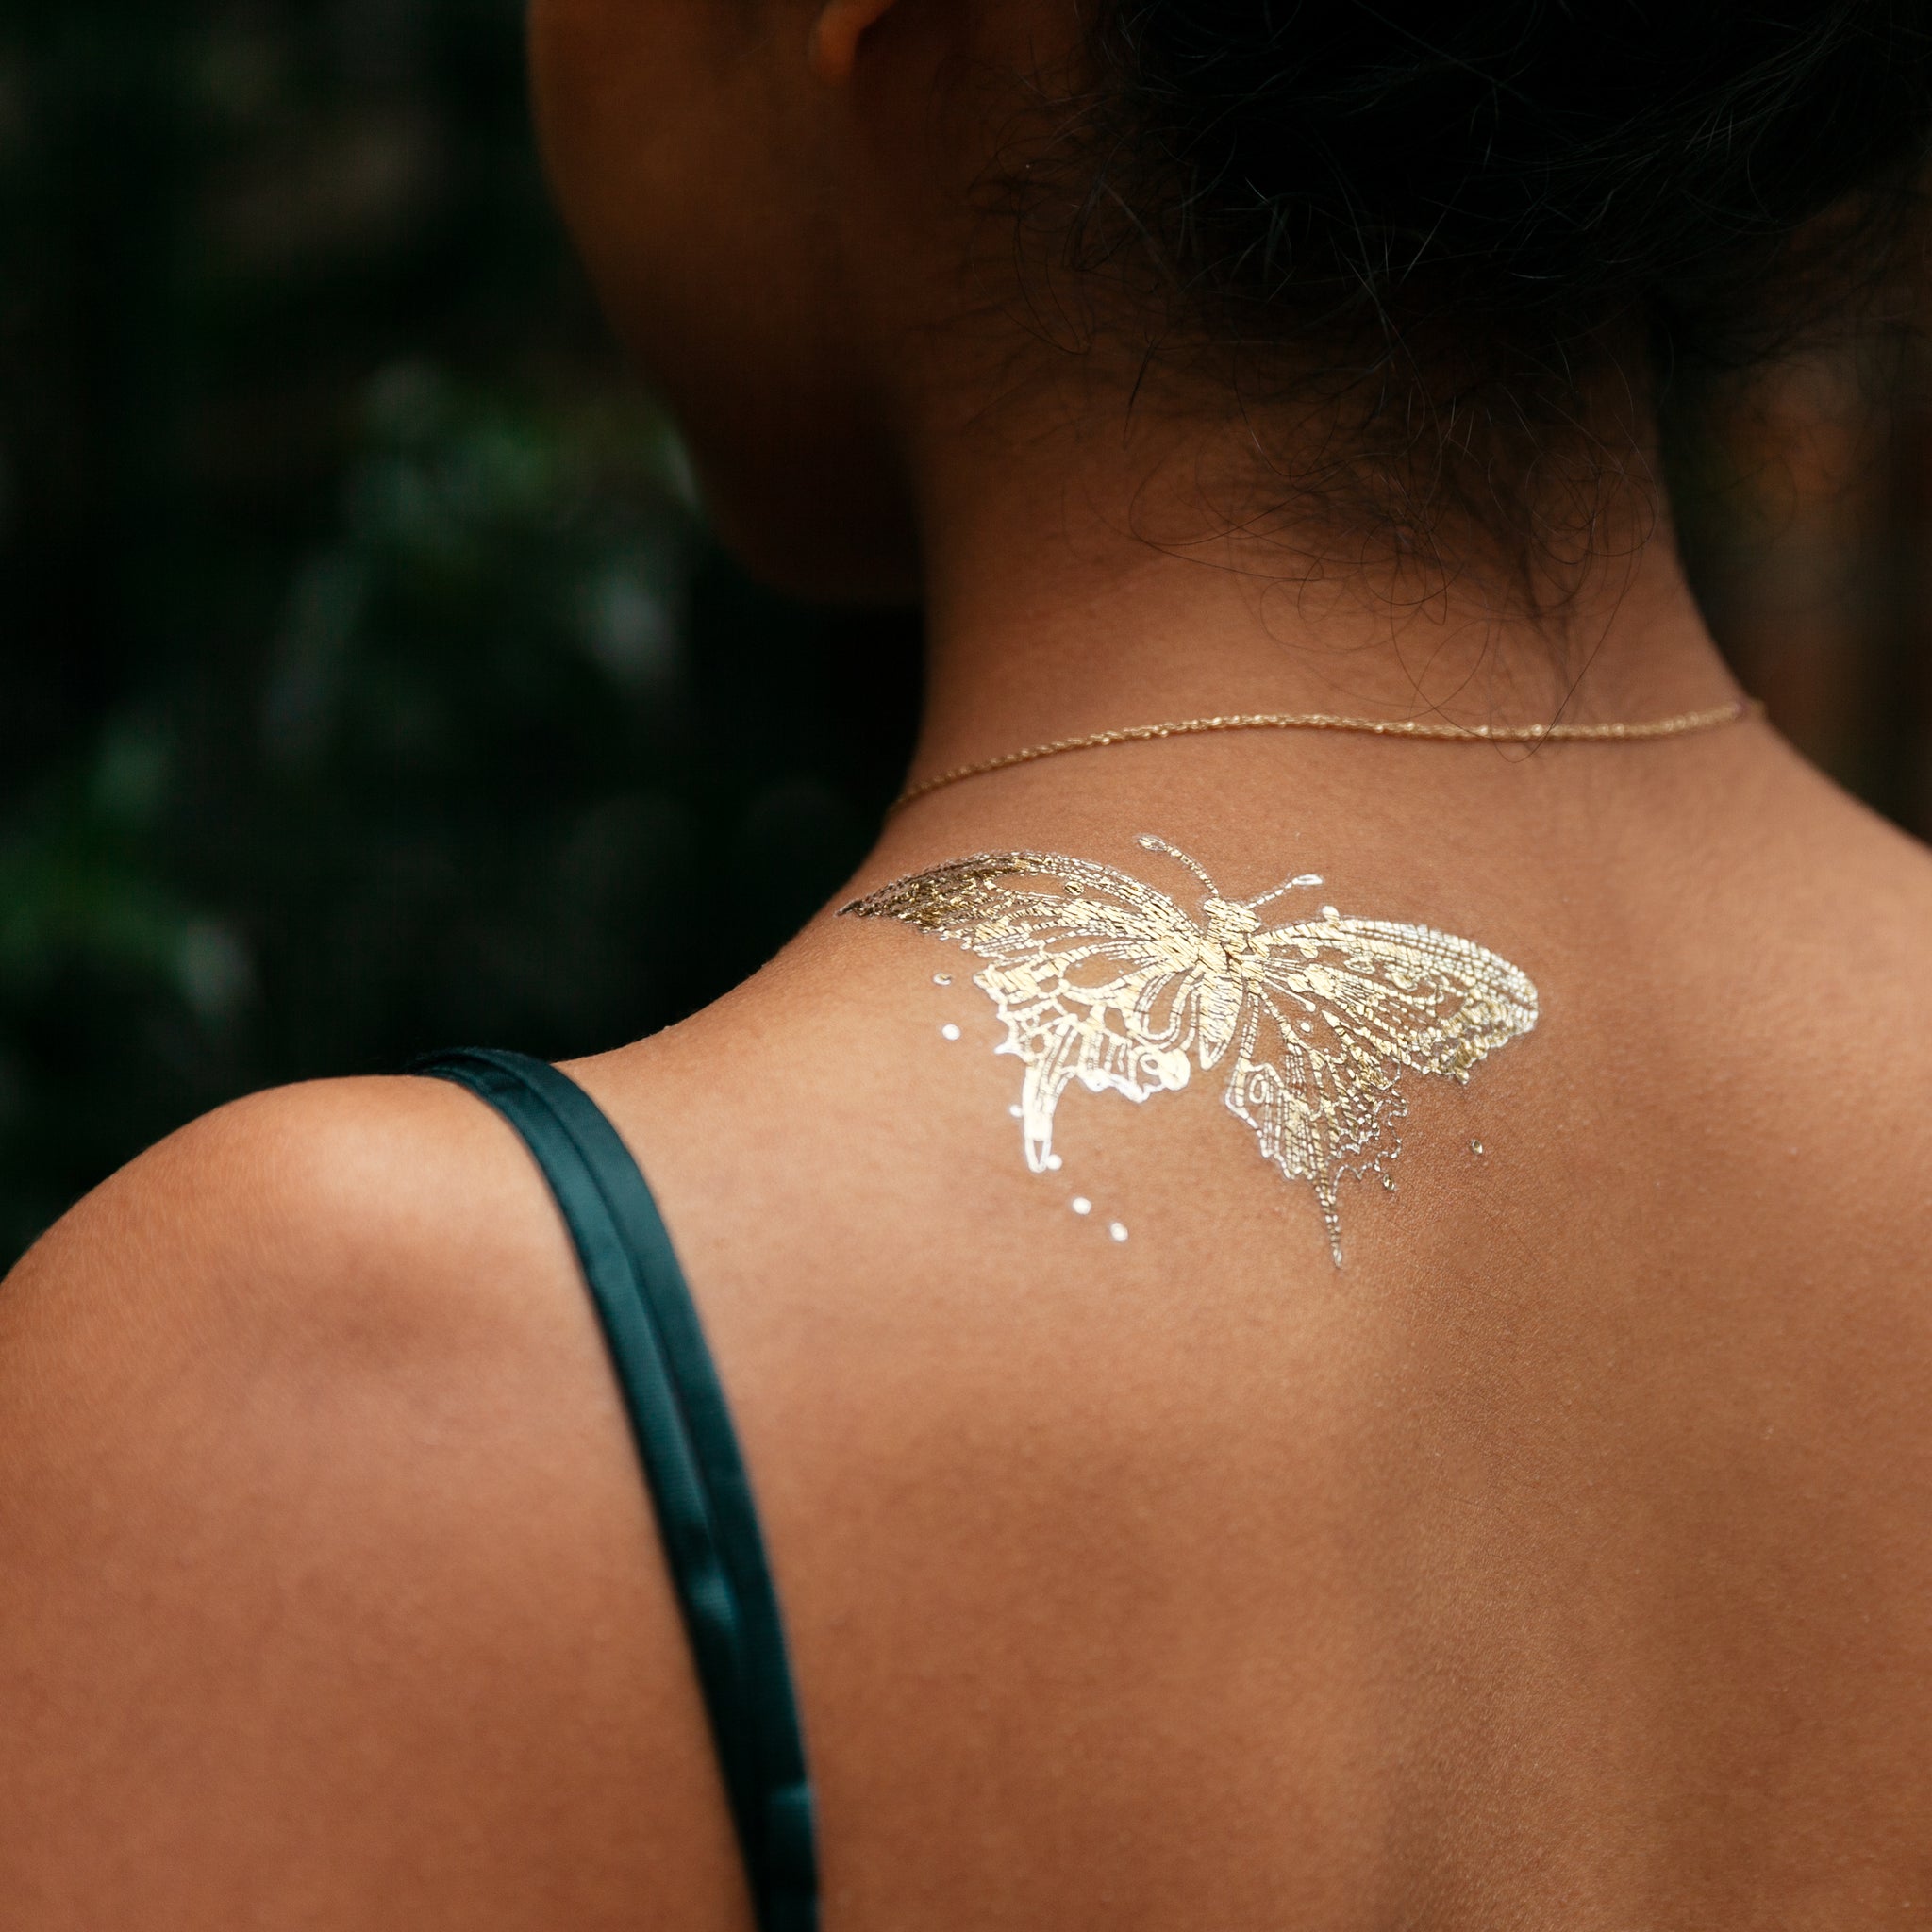 Flit (Gold) by Stina Persson from Tattly Temporary Tattoos – Tattly  Temporary Tattoos & Stickers